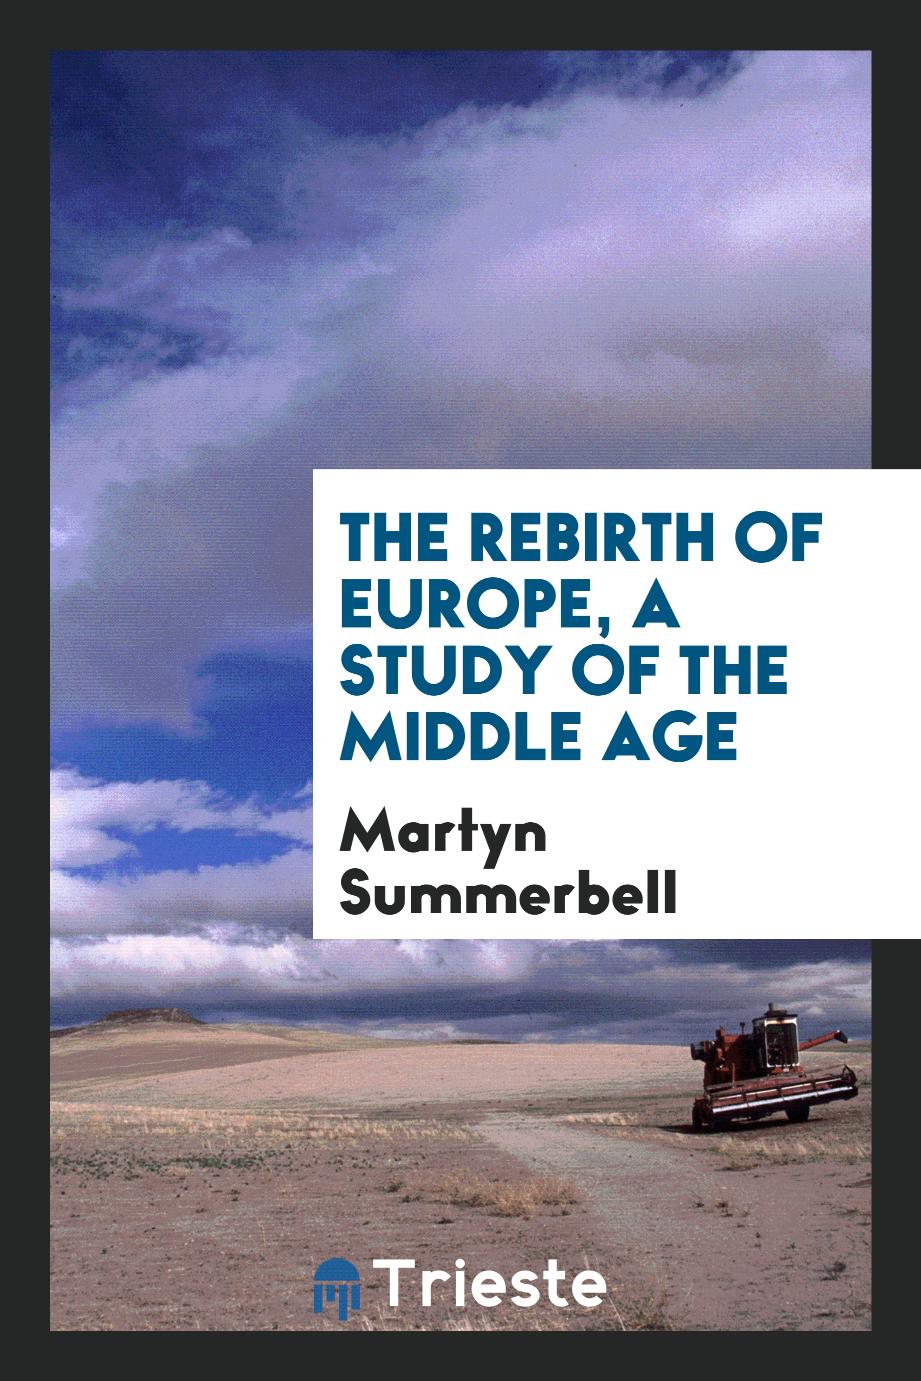 The rebirth of Europe, a study of the middle age